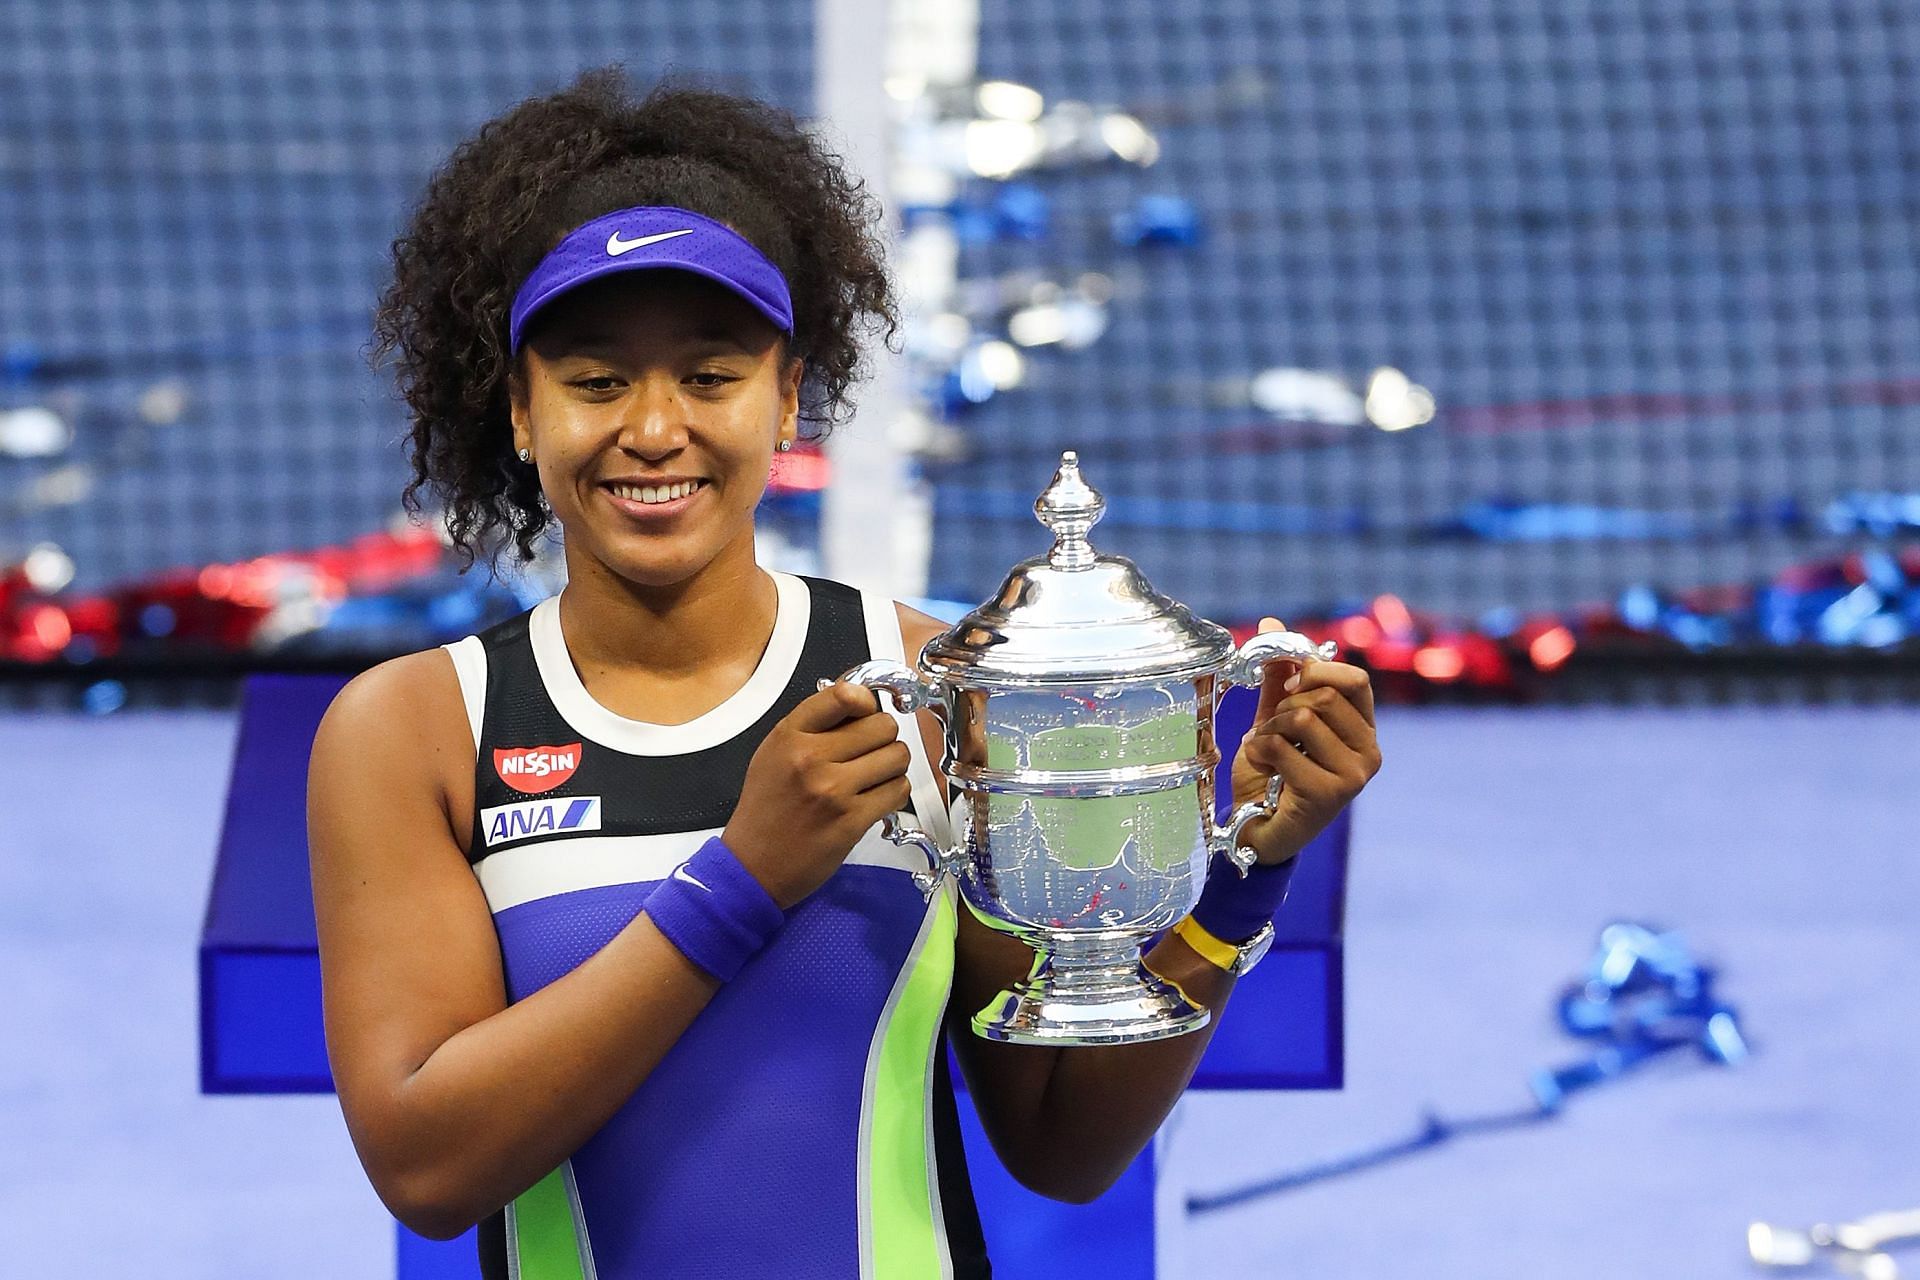 Naomi Osaka pictured after winning the 2020 US Open